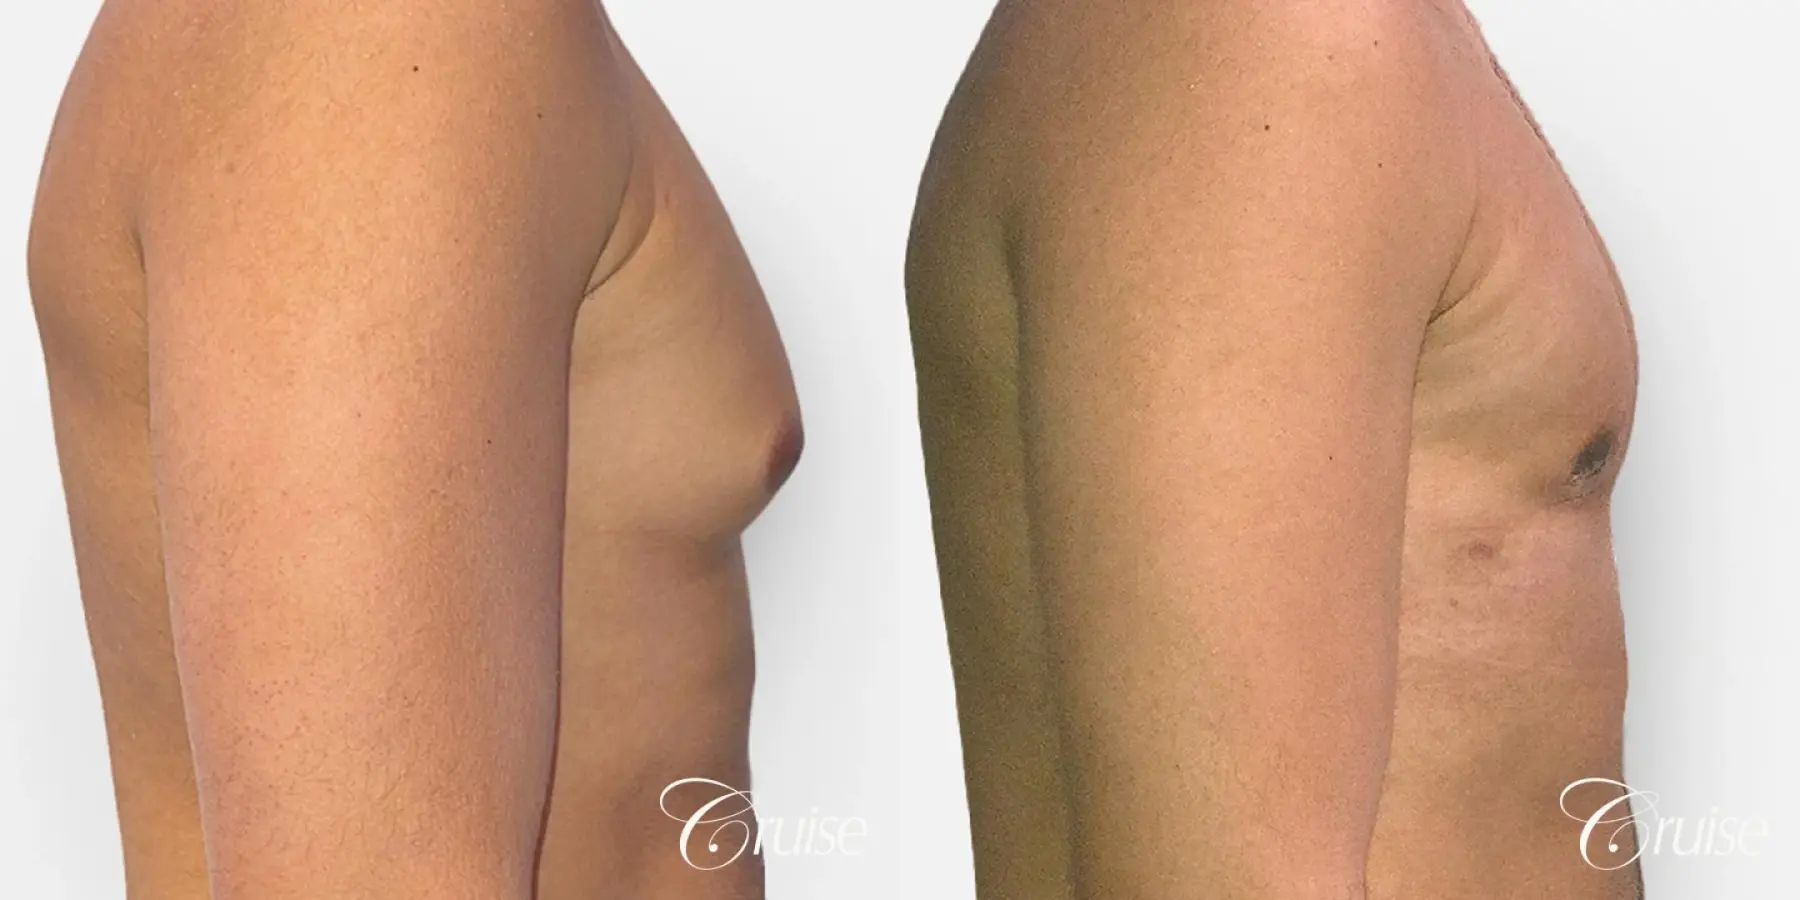 Type 2 Latino Gynecomastia Removal - Before and After 2